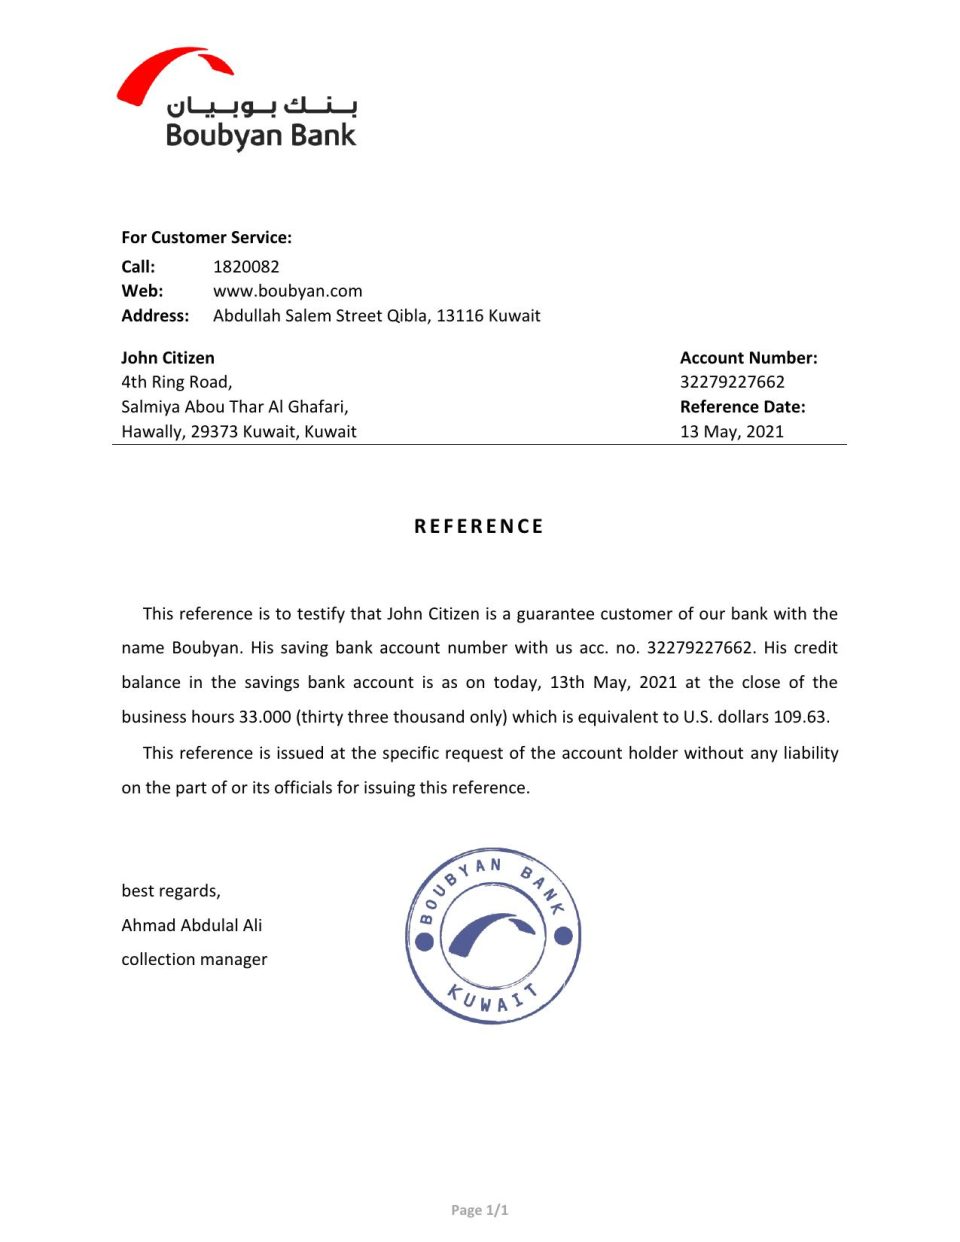 Download Kuwait Boubyan Bank Reference Letter Templates | Editable Word